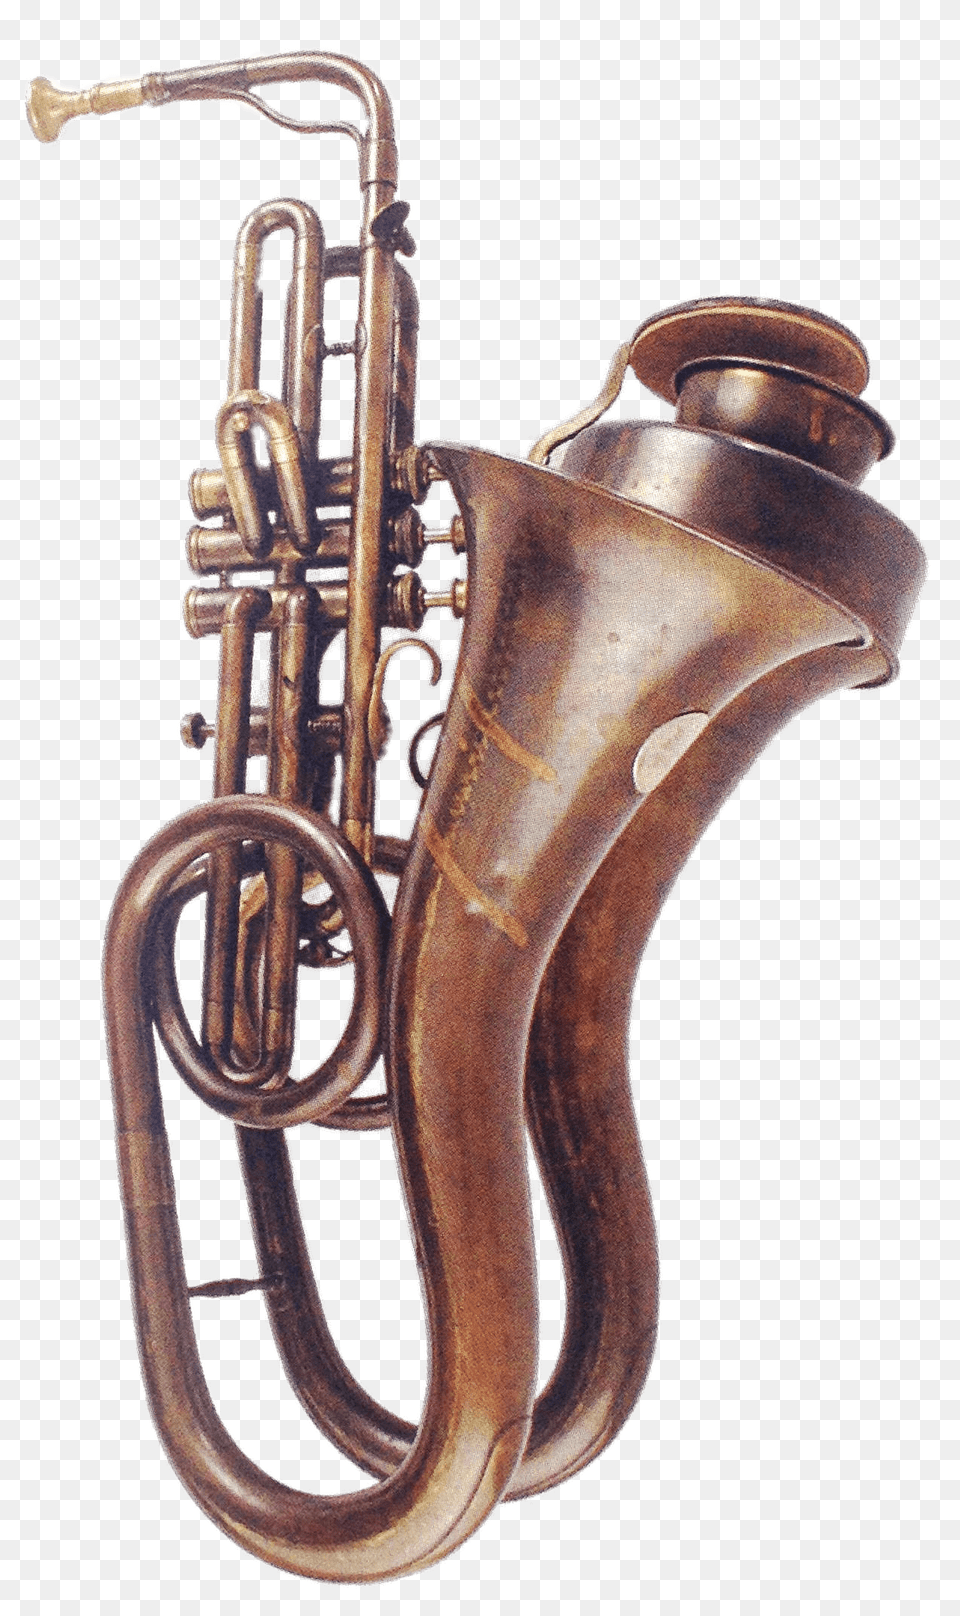 Jazzophone, Bronze, Musical Instrument, Brass Section, Horn Png Image